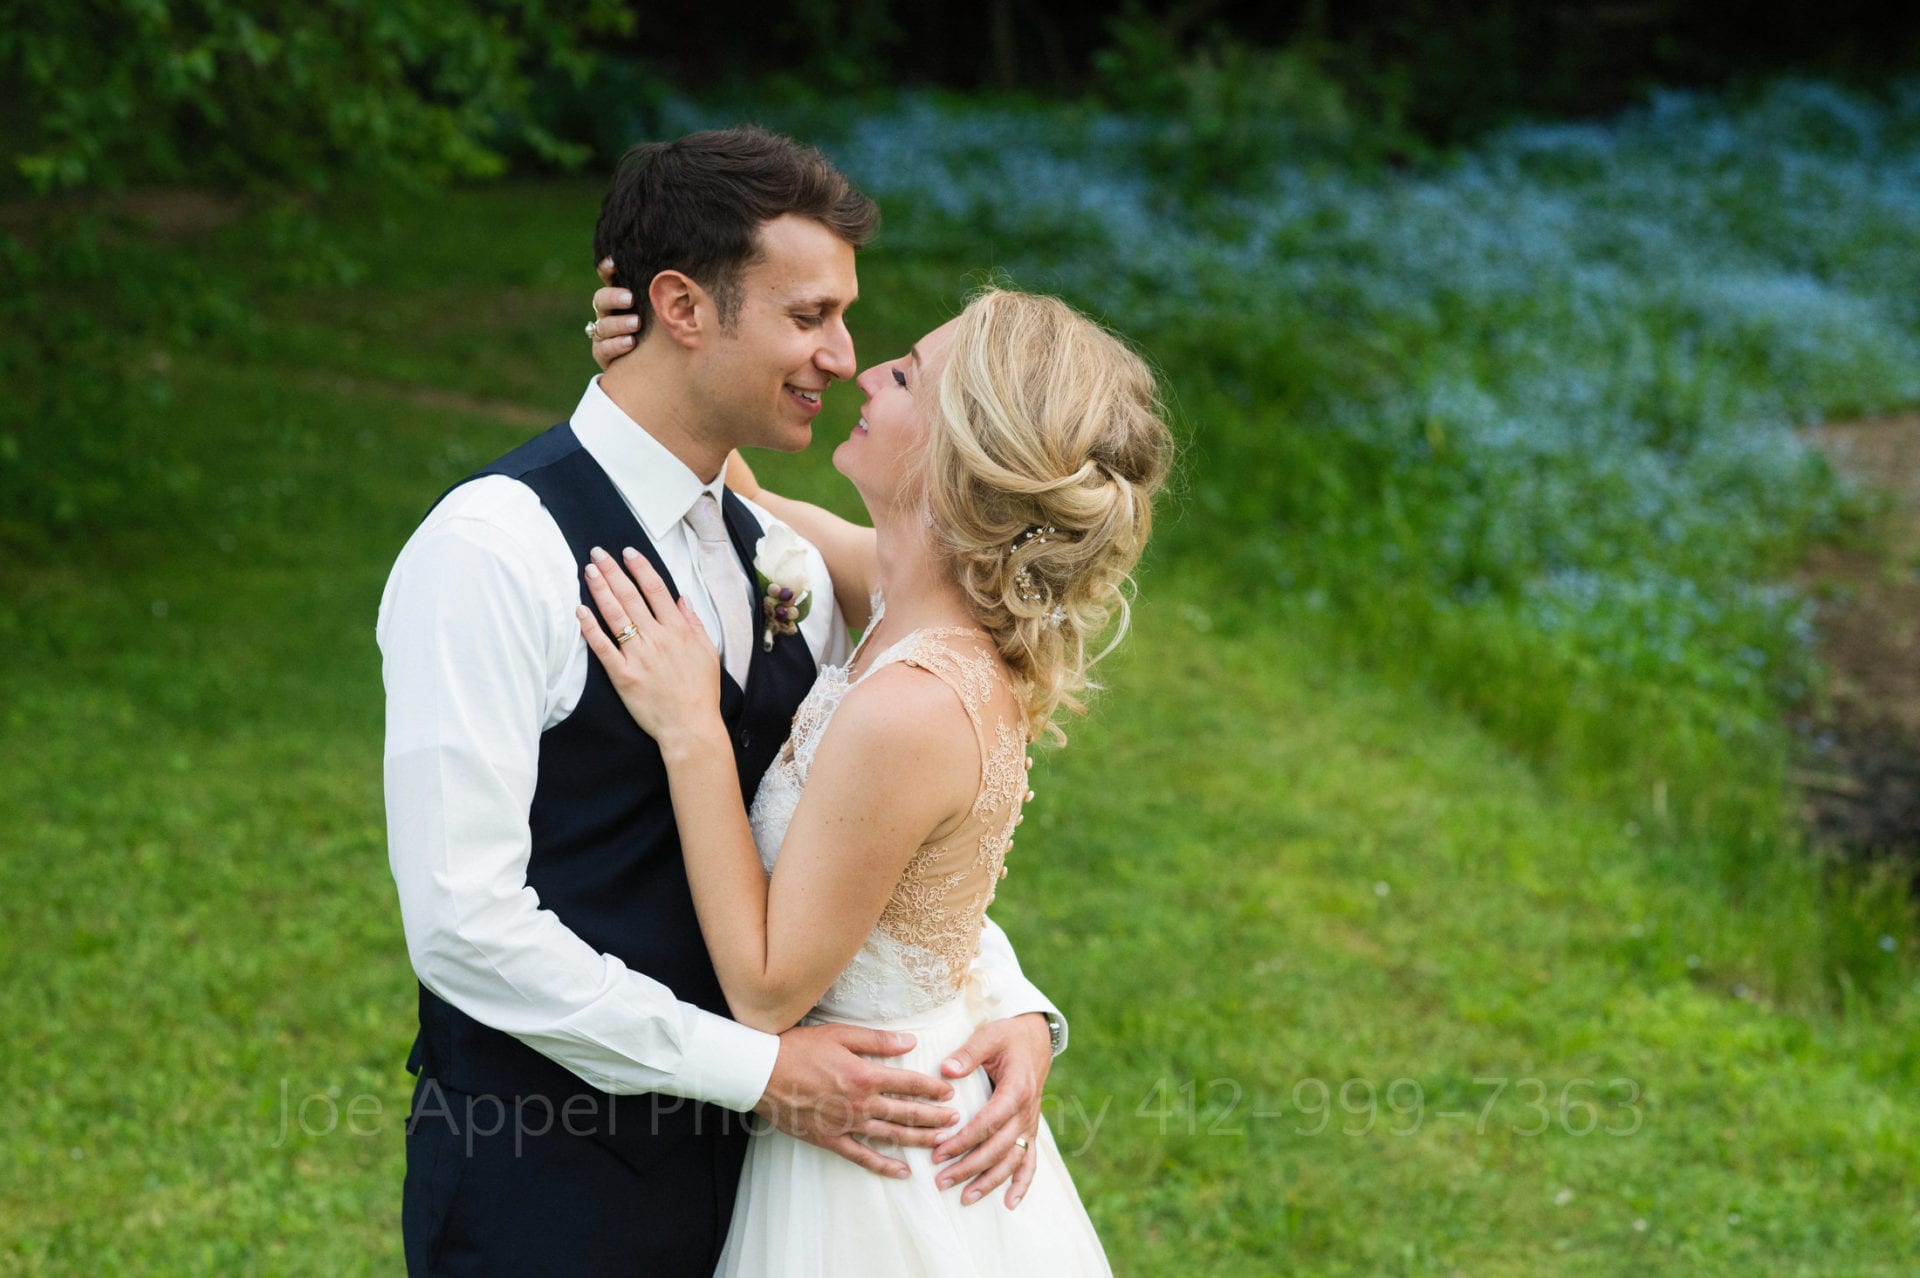 a bride and groom smile at each other and embrace in a grassy field Seven Springs Weddings